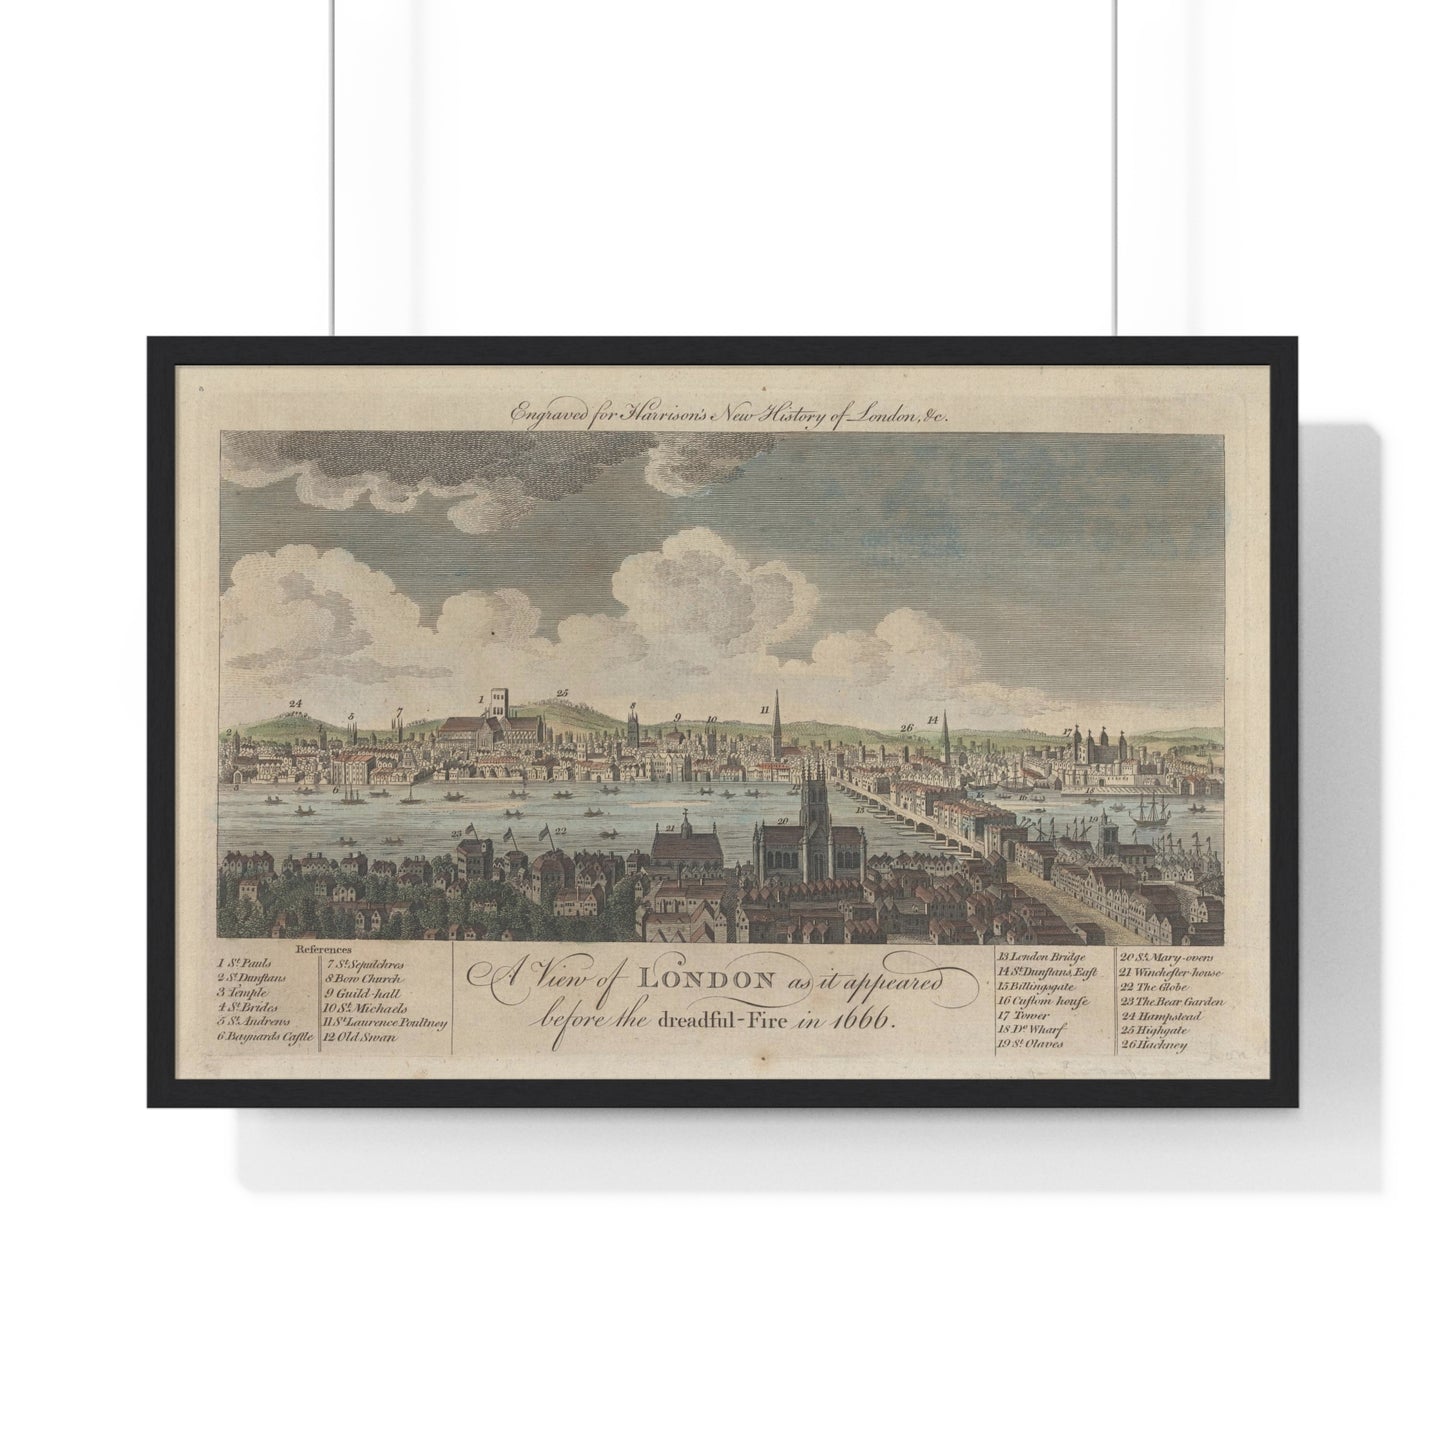 A View of London as it Appeared Before the Dreadful Fire in 1666 (1766) from the Original, Framed Art Print